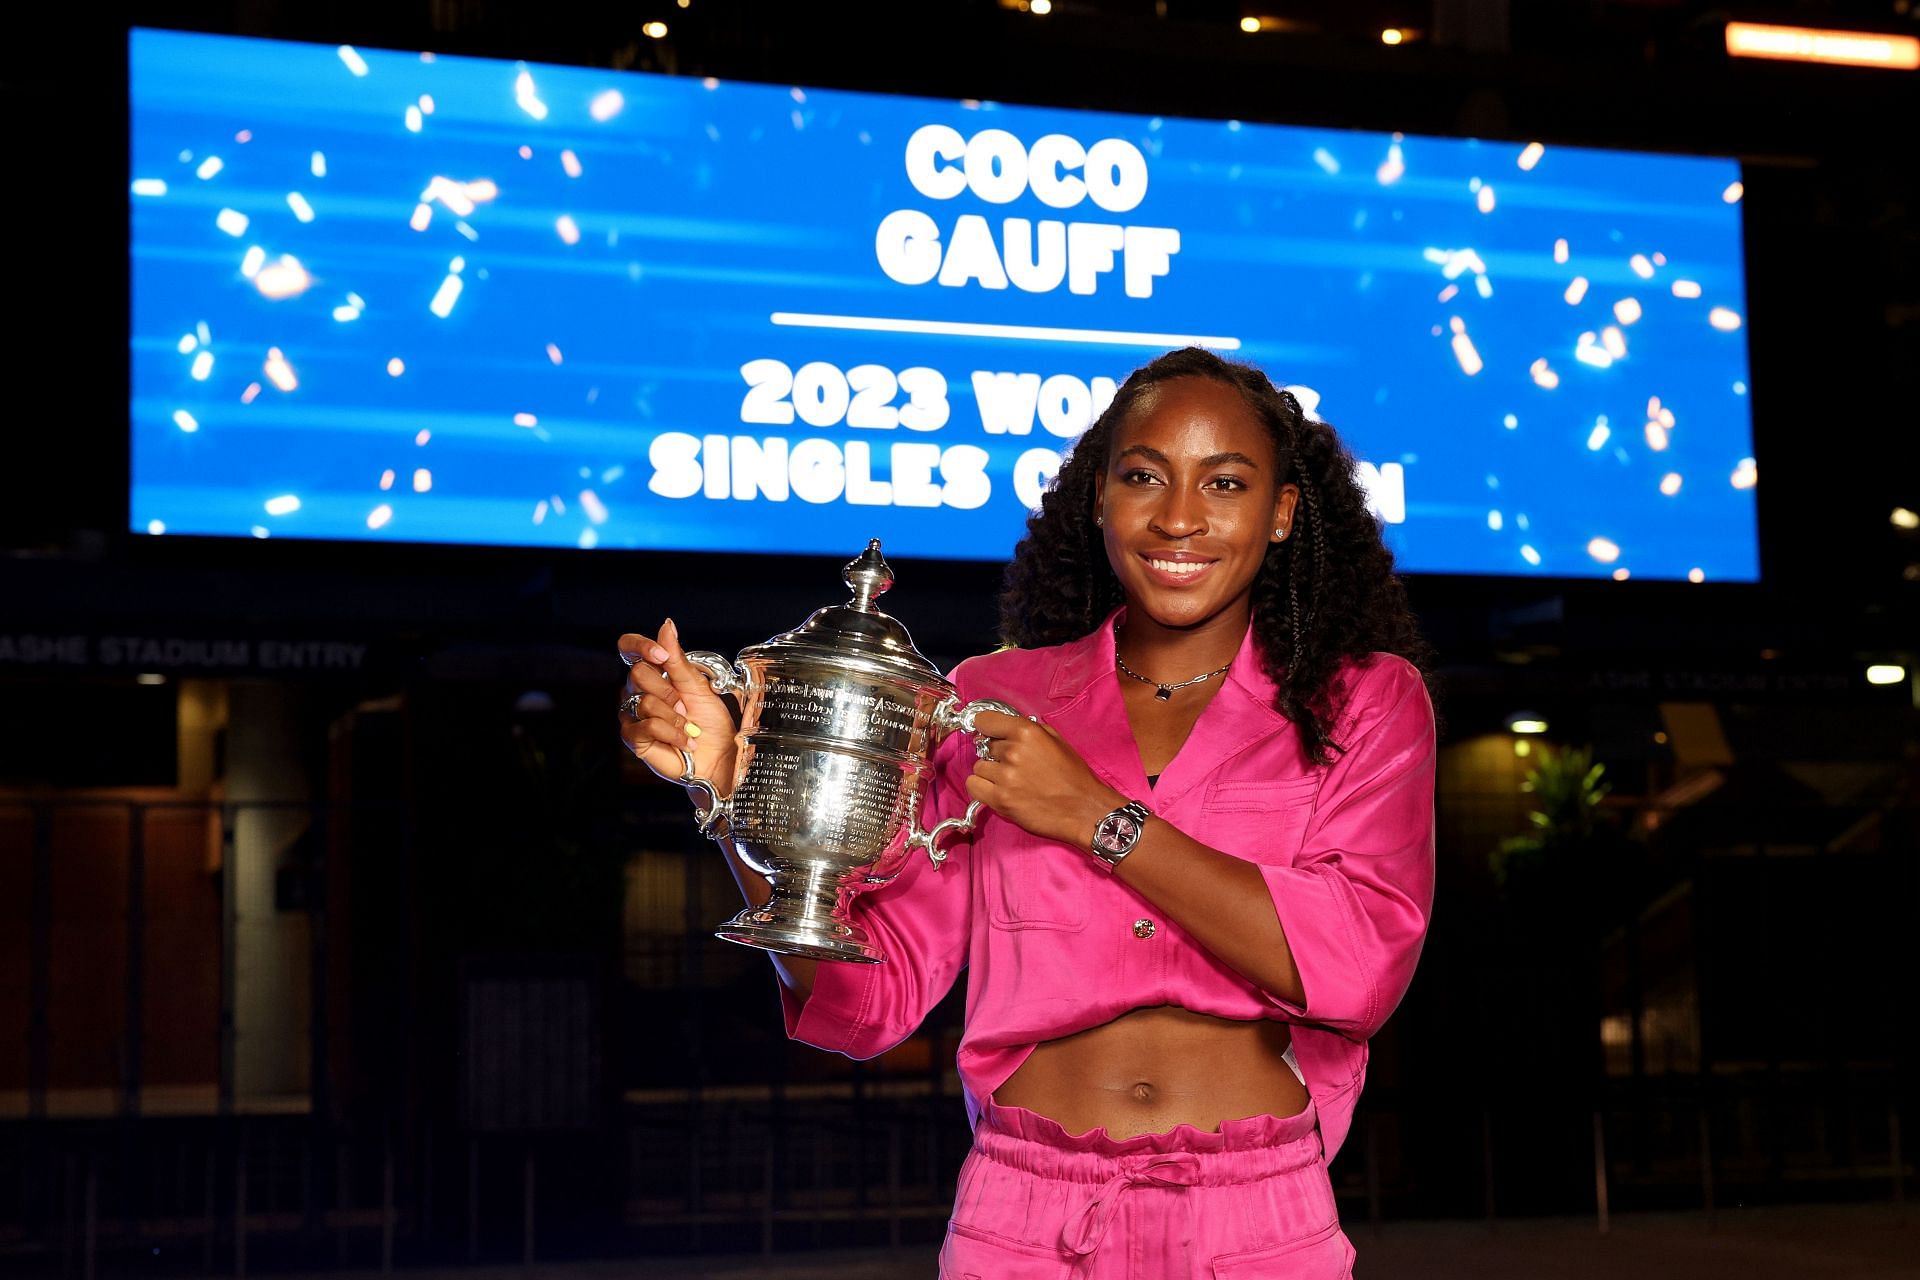 Coco Gauff pictured with her 2023 US Open trophy